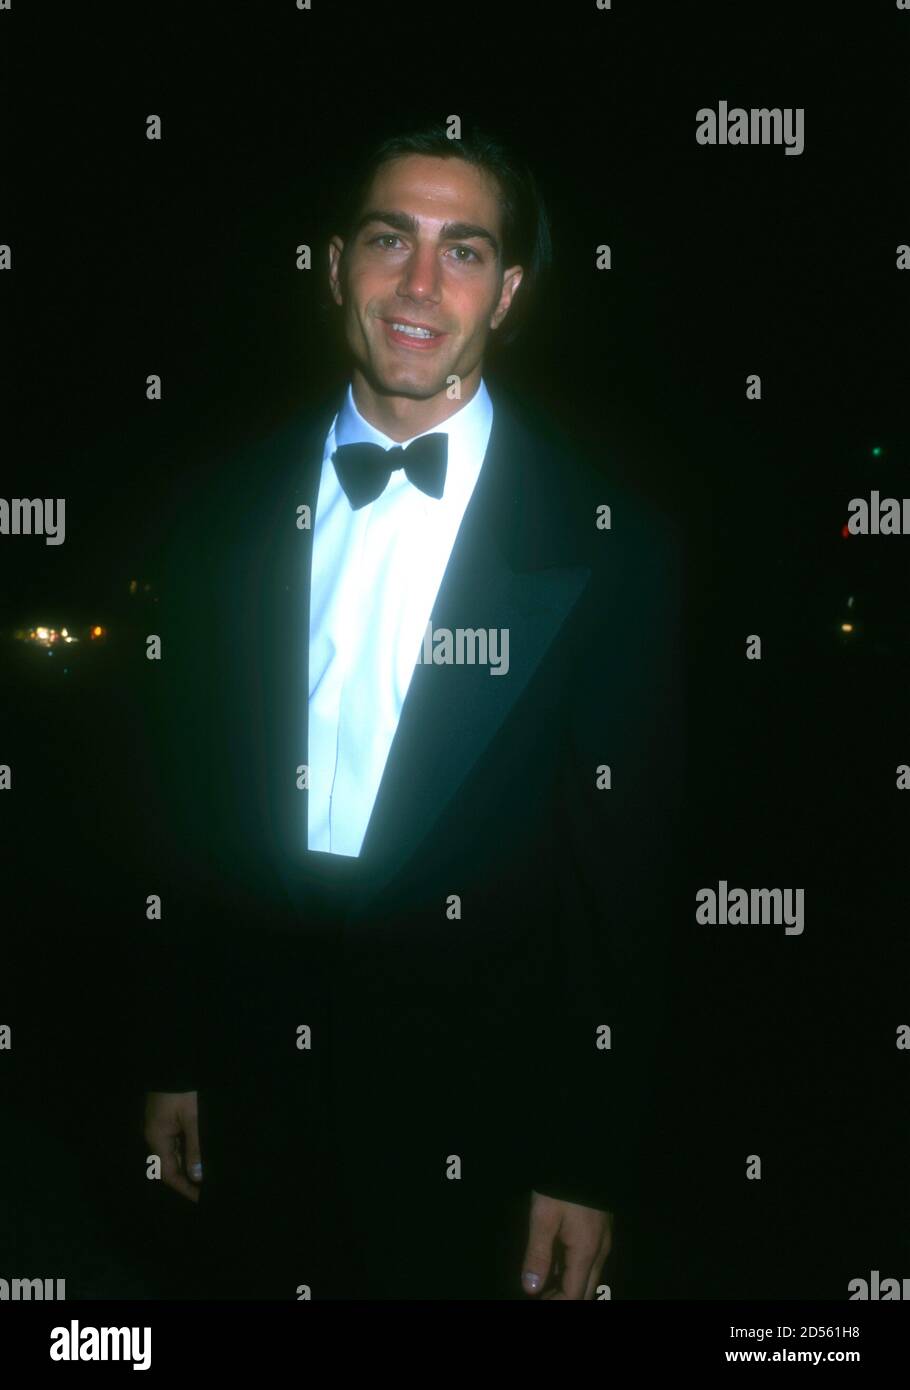 Los Angeles, California, USA 25th March 1996 Model/actor Michael Bergin attends the 68th Annual Academy Awards at Dorothy Chandler Pavilioin on March 25, 1996 in Los Angeles, California, USA. Photo by Barry King/Alamy Stock Photo Stock Photo